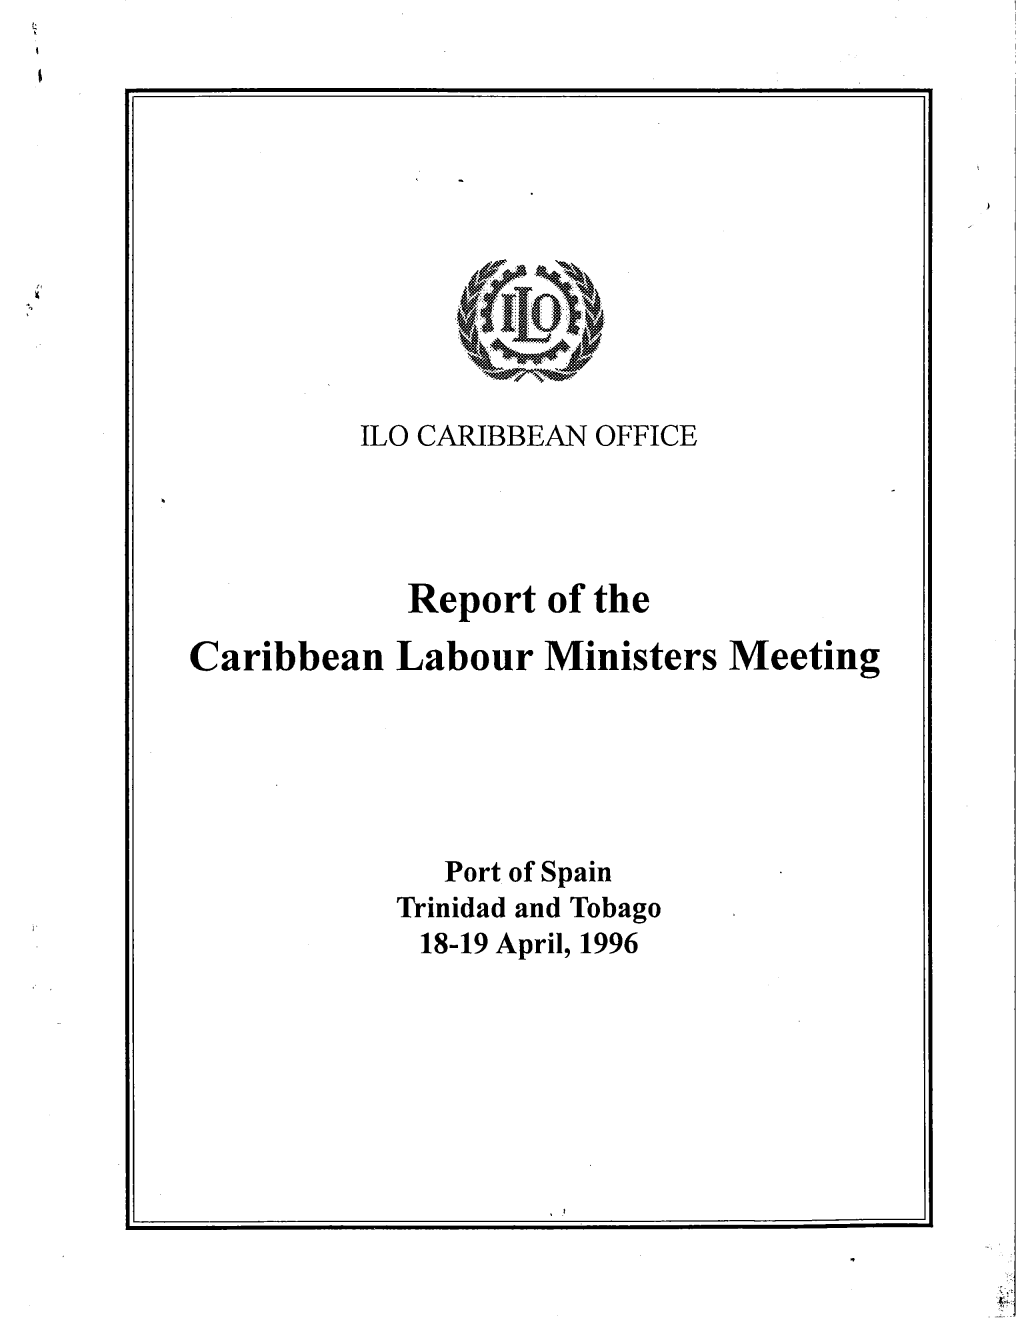 Report of the Caribbean Labour Ministers Meeting